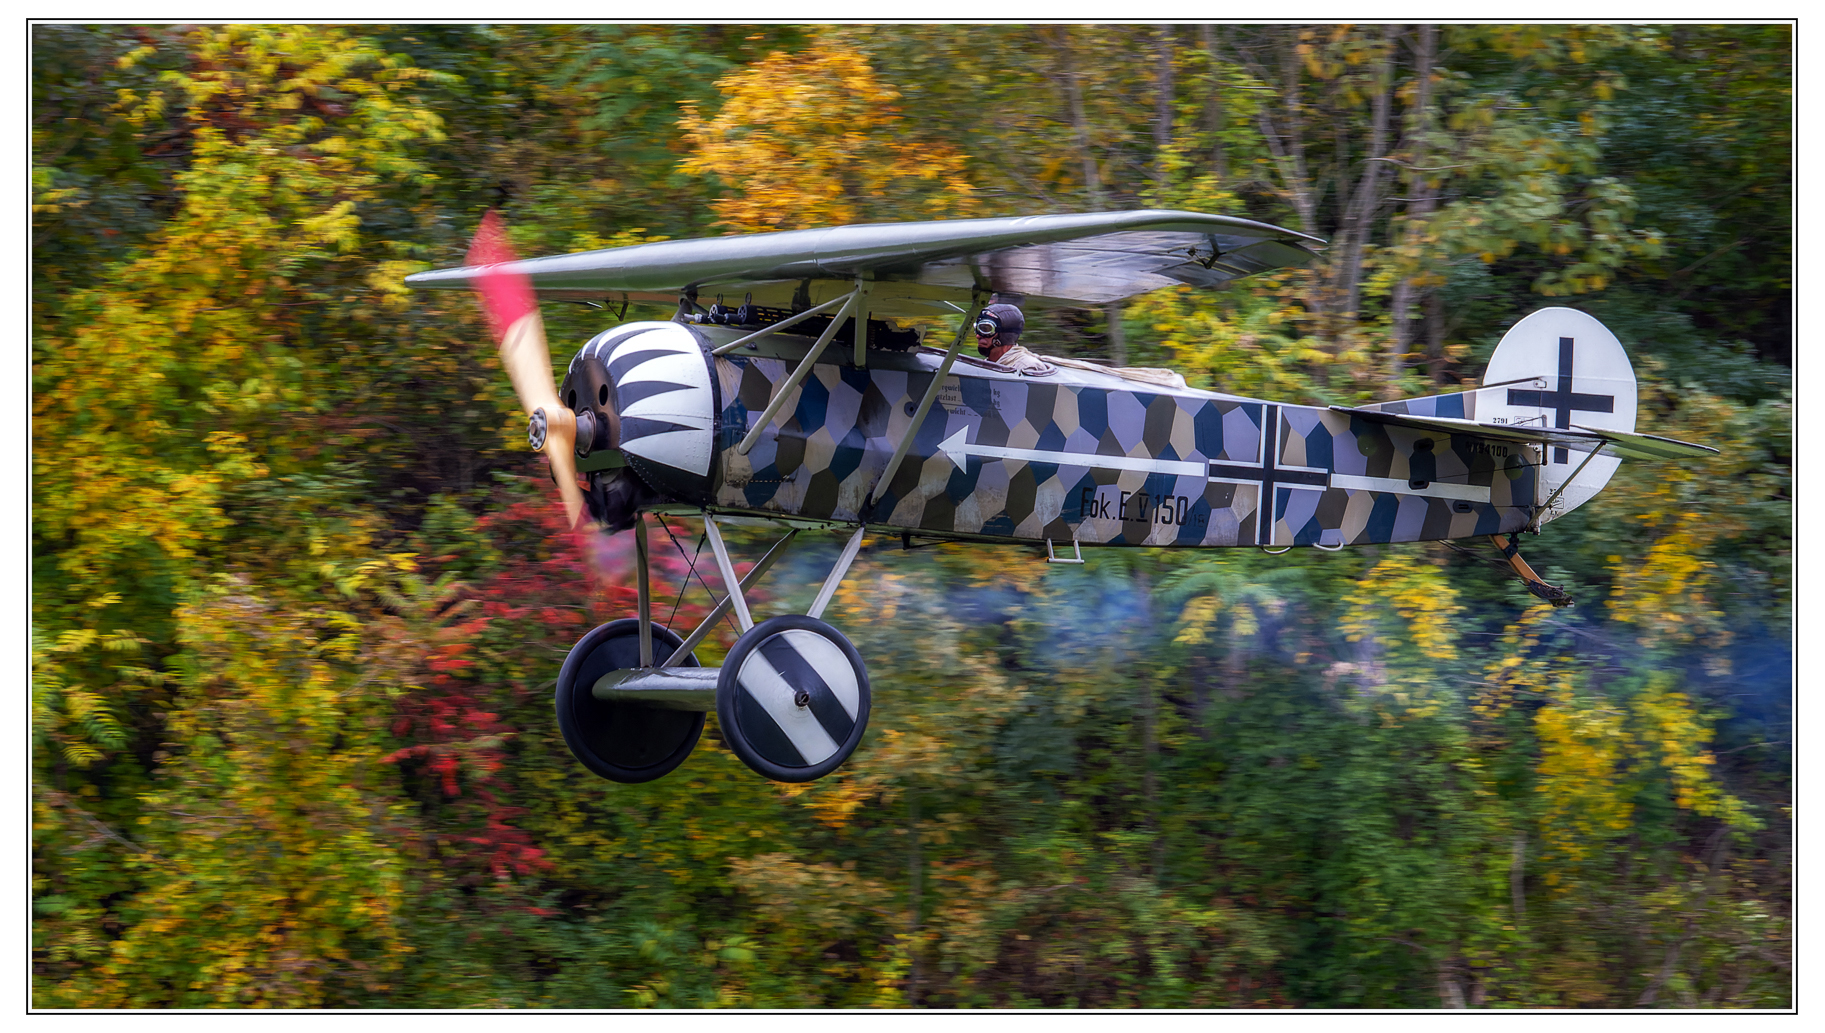 Vintage airplane photographed at Rhinebeck Aerodome by Robert Near